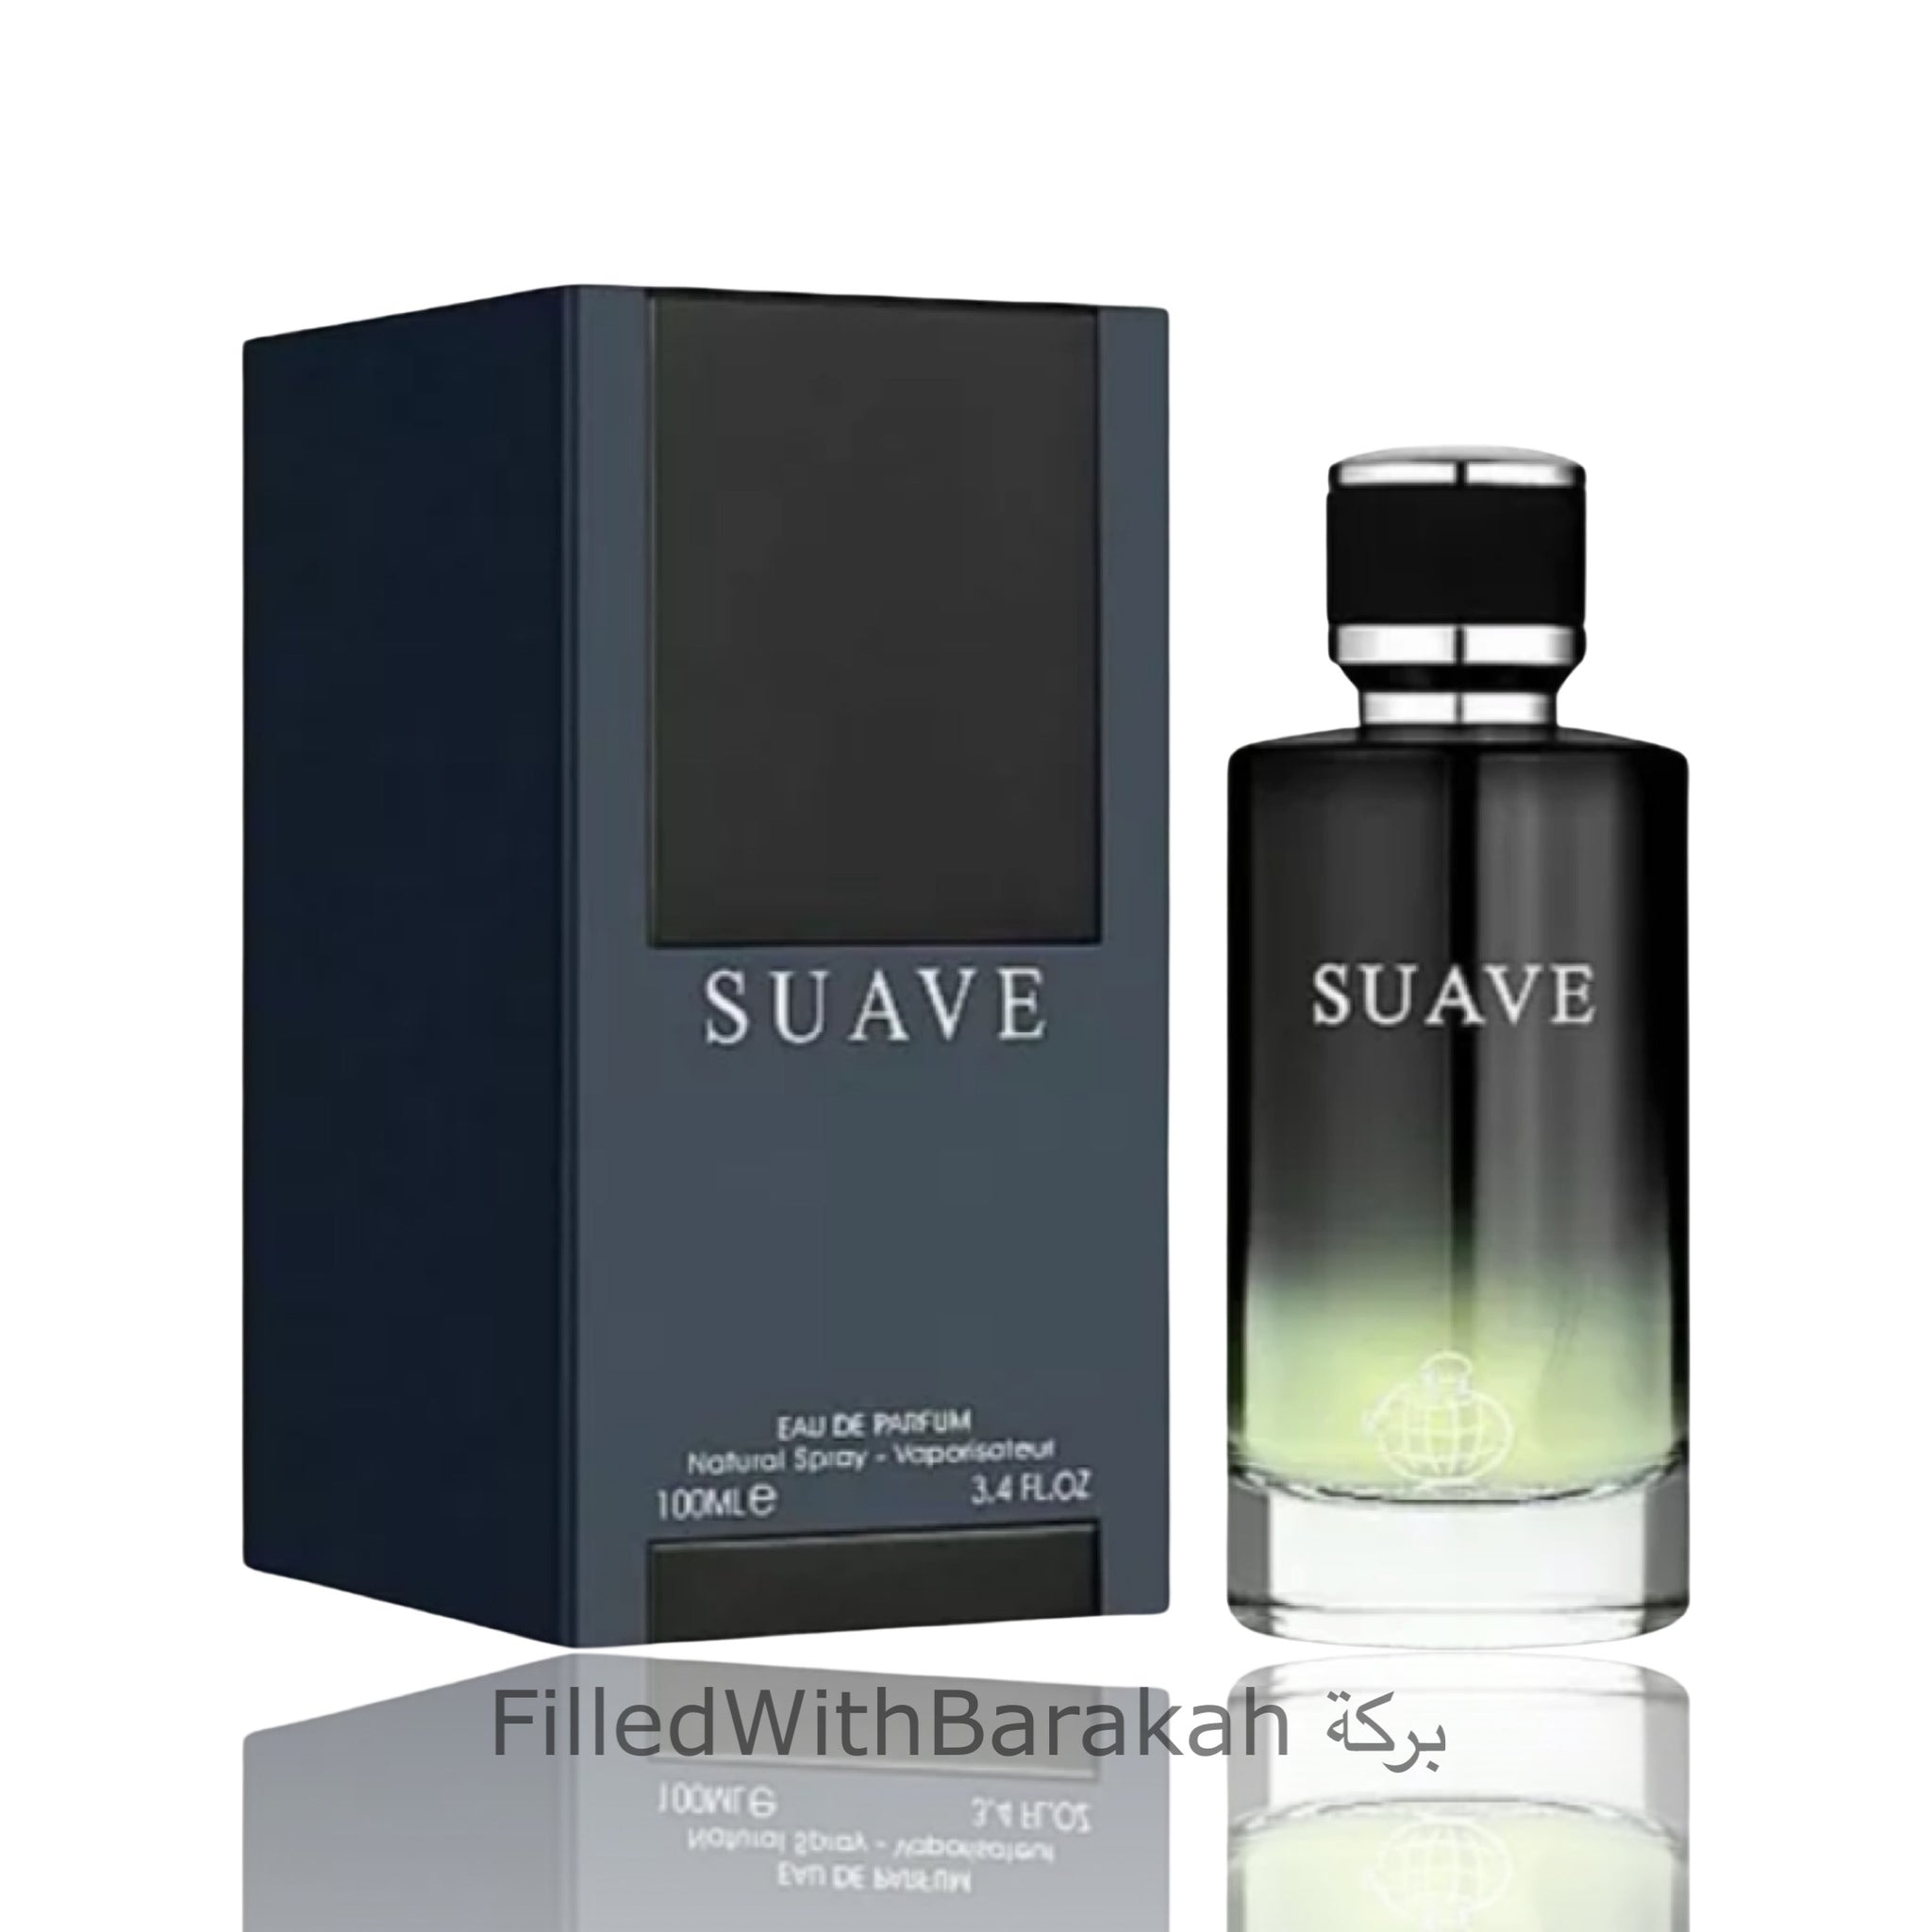 Suave | Eau De Parfum 100ml | by Fragrance World *Inspired By Sauvage ...